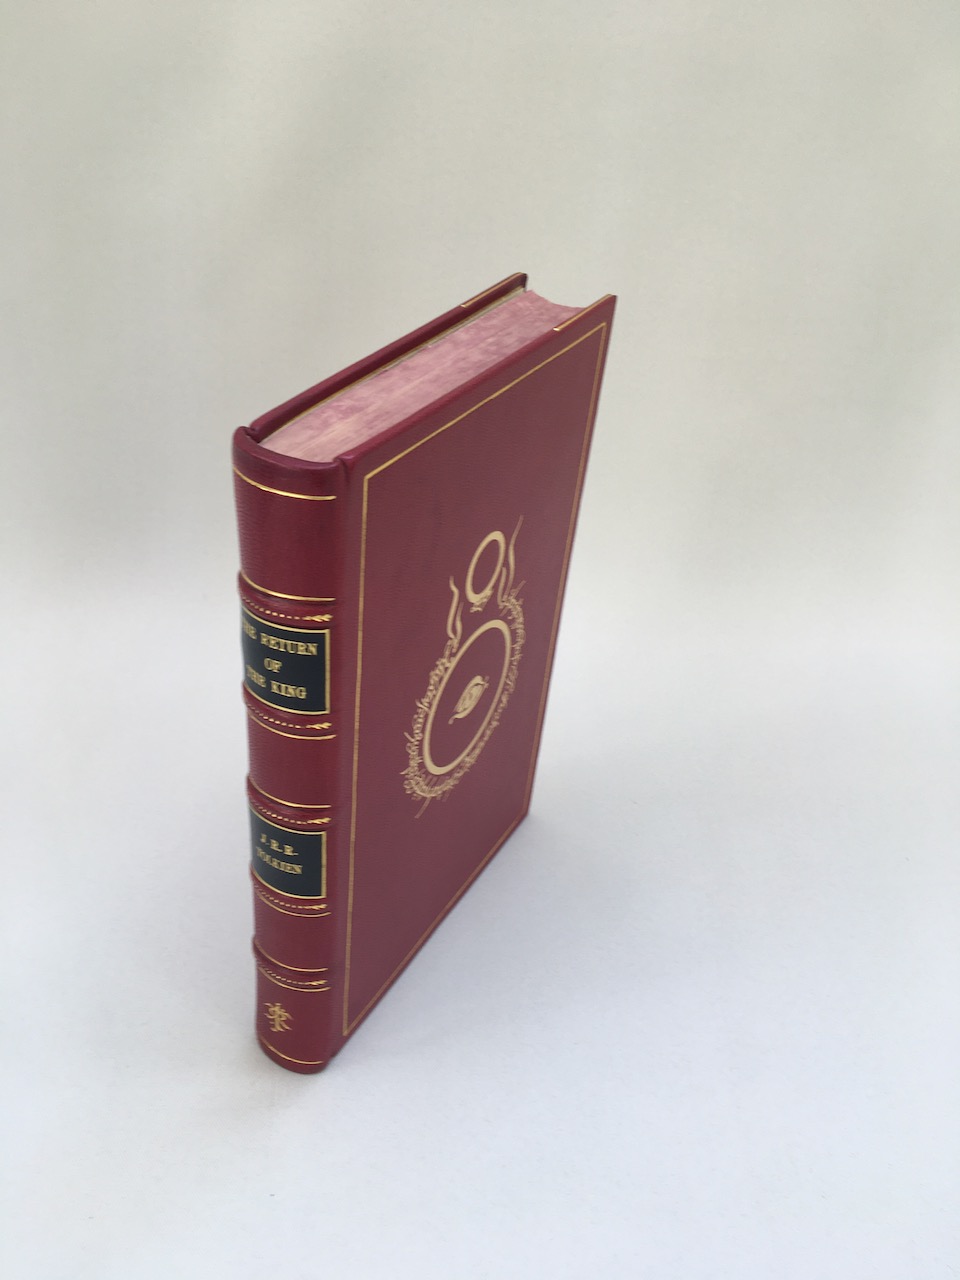 
The Lord of the Rings, George Allen & Unwin, 1954/54/55 1st UK Edition. Rebound set. 42